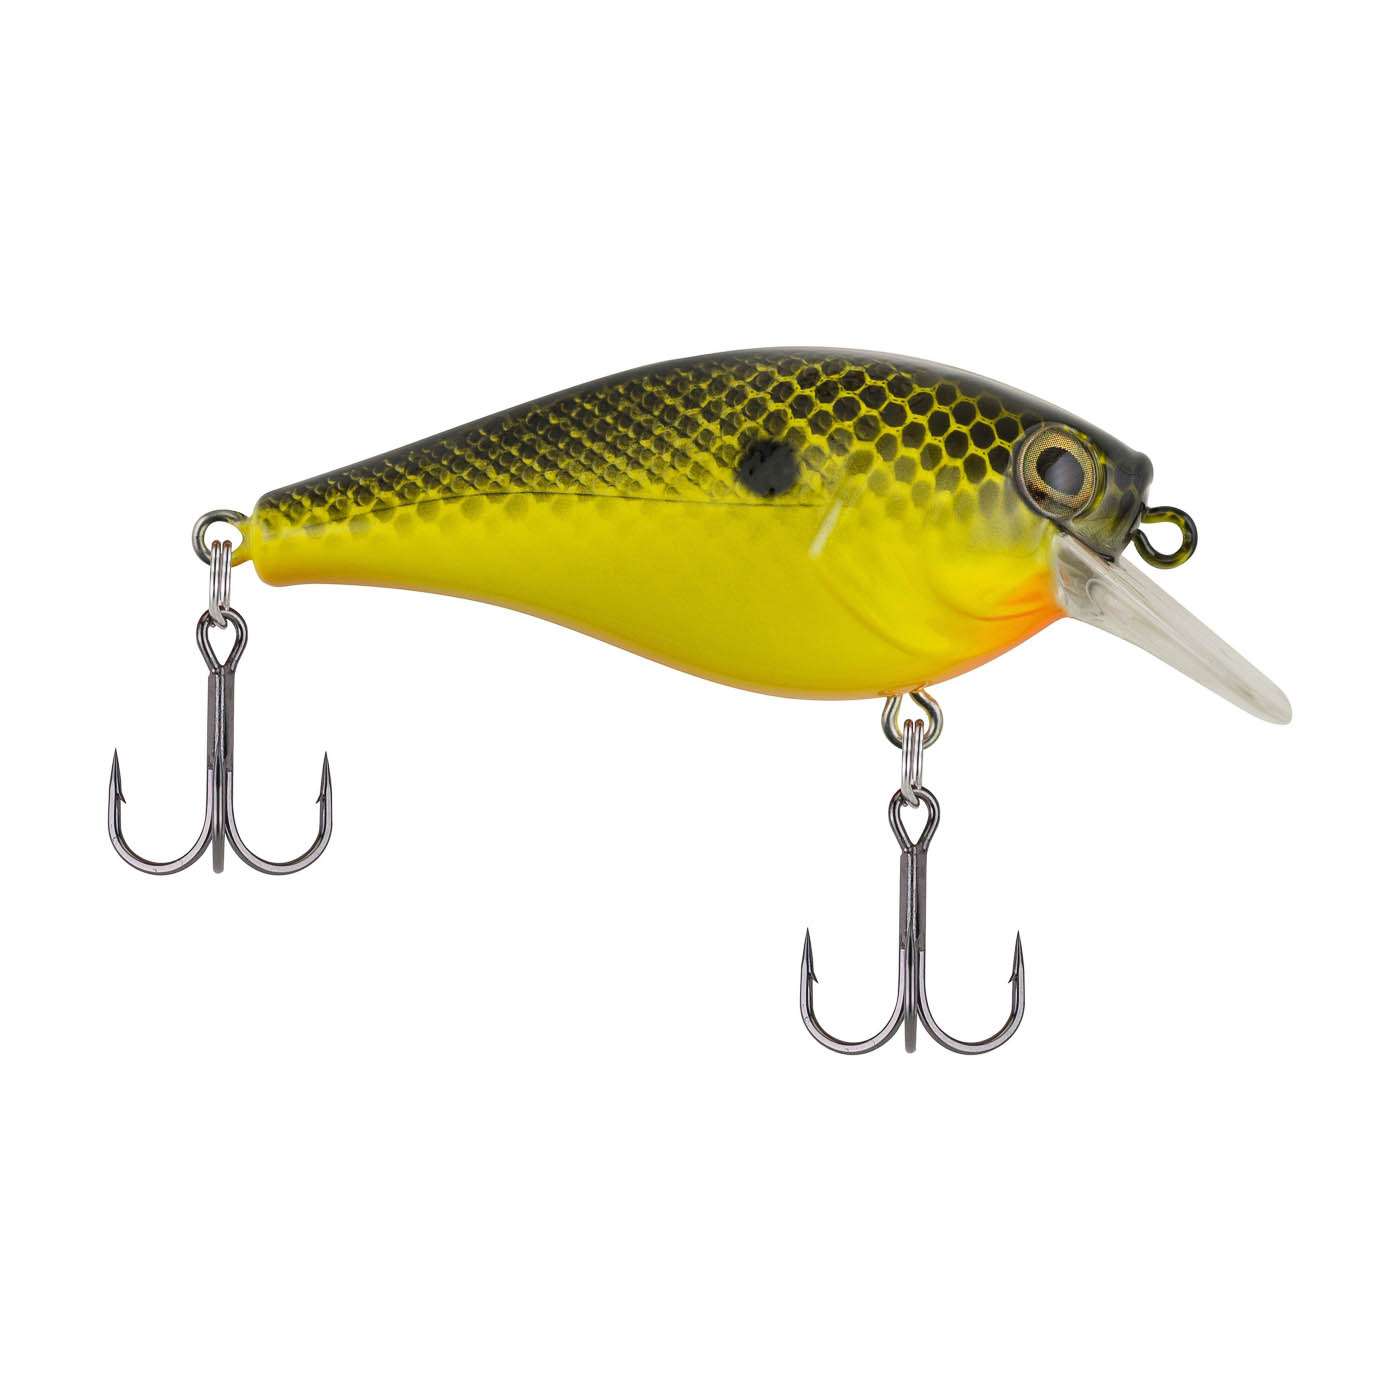 <p><strong>Berkley Squarebull</strong></p><p>The Squarebull adds new colors to the lineup. Those are Black Chartreuse, Blue Shad, Firetail Green Craw, Ghost Morning Dawn, Ghost Red Craw and Green Shad. The Squarebullâs wide body features a swaggering tail wag. Deflective properties and a durable square bill make it ideal for banging against rock and timber. Rigged with Berkley Fusion19 treble hooks. Available September 2021. $7.99. <a href=